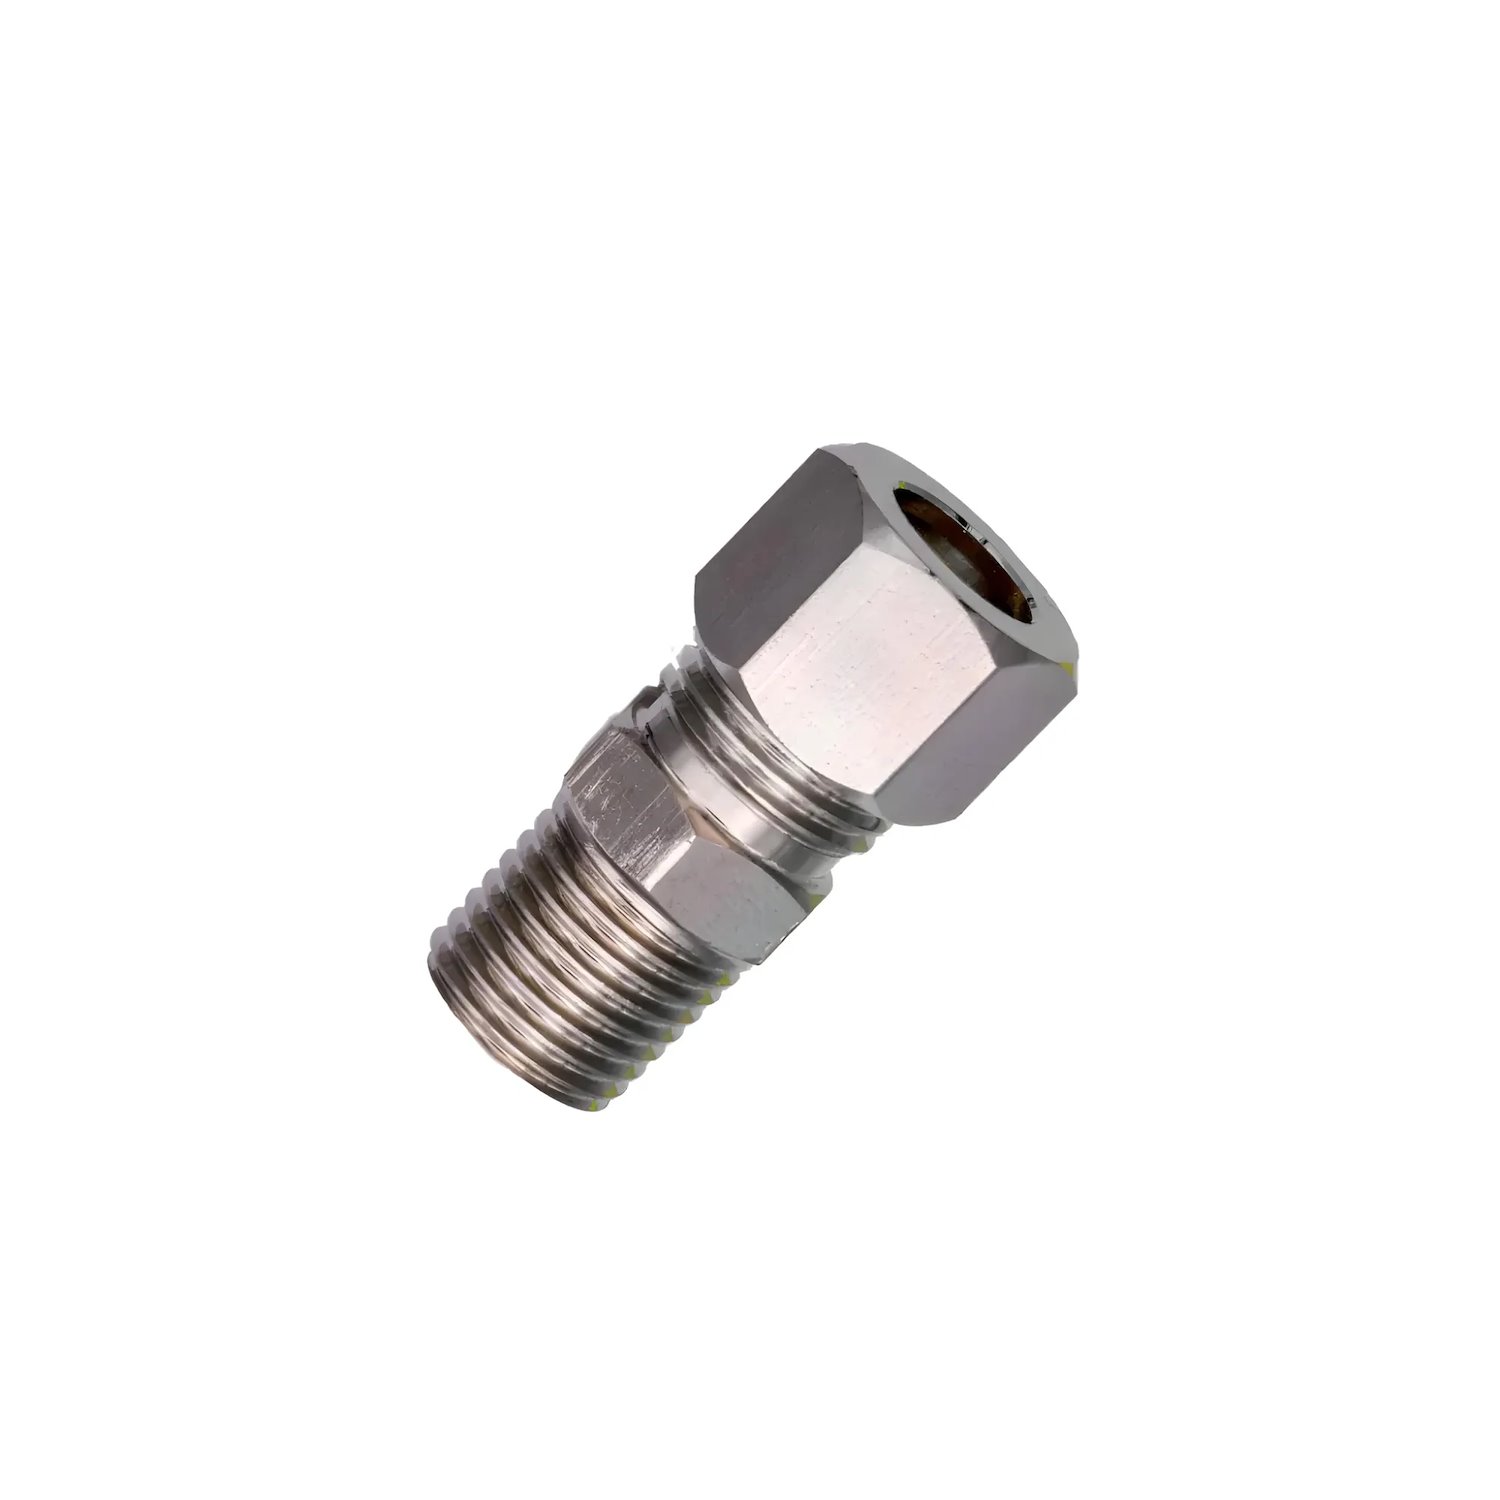 00-01505-B 1/4 in. NPT Male x 3/8 in. Compression Straight Fitting